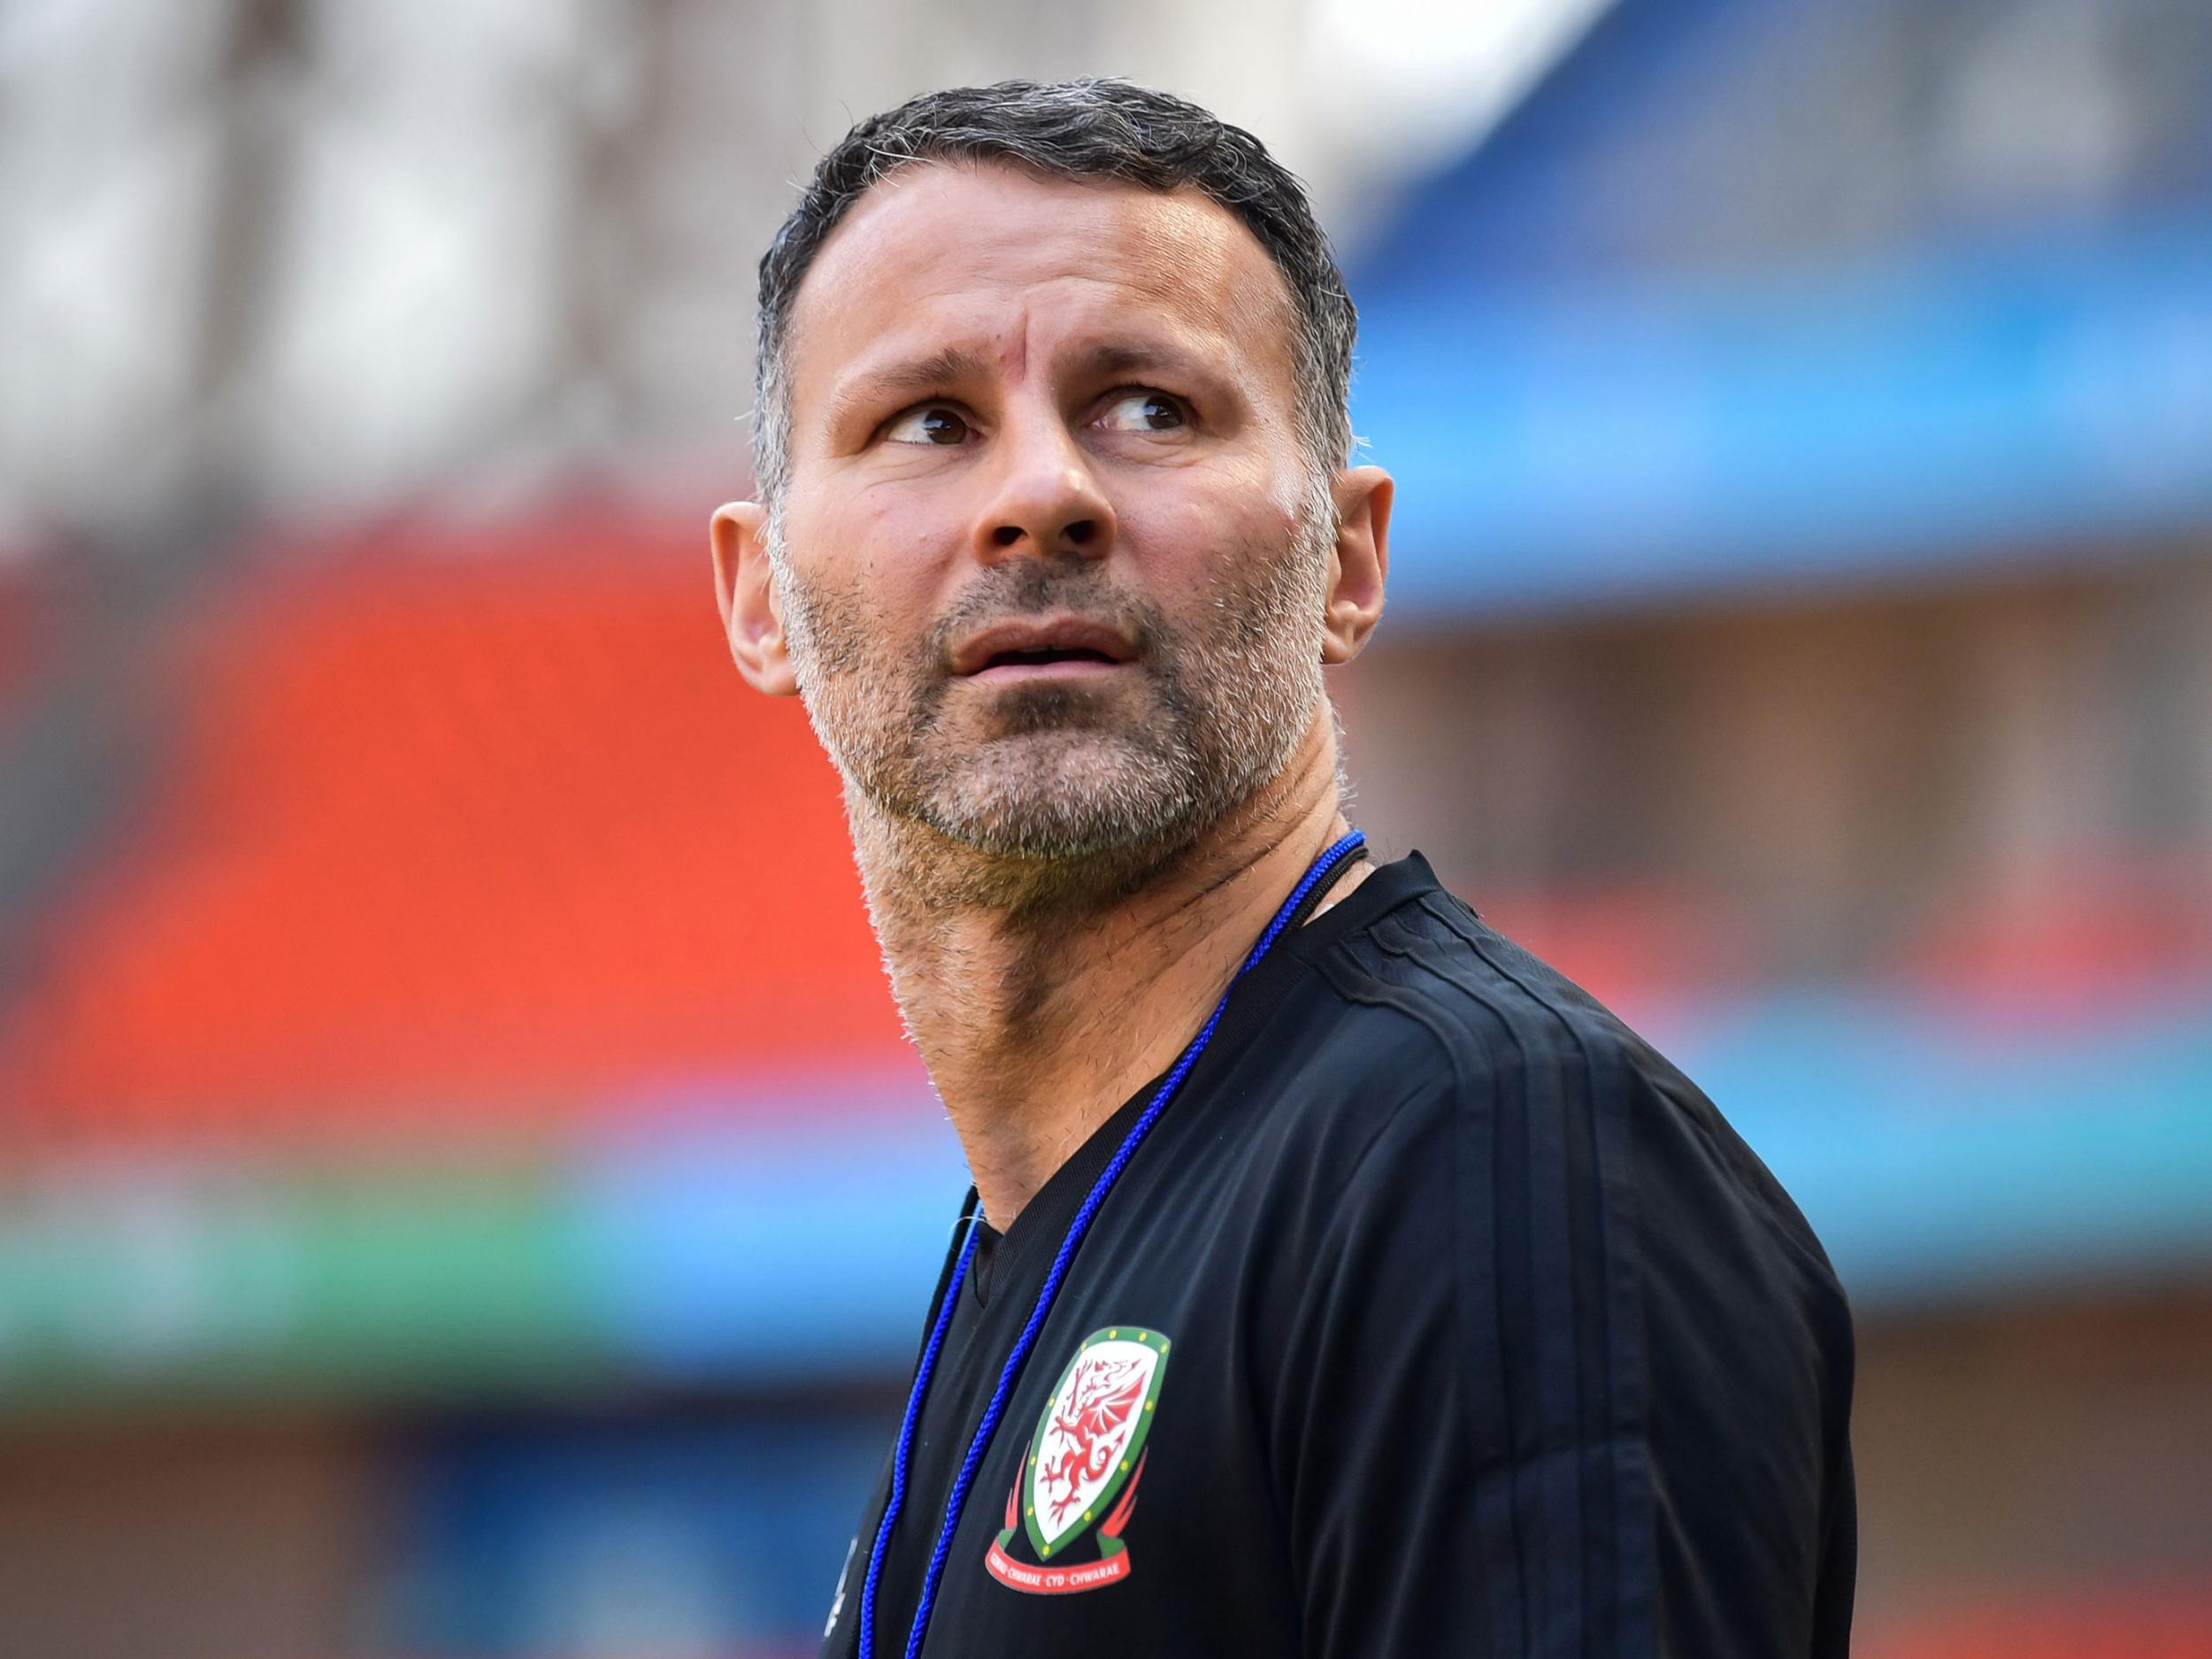 Ryan Giggs is set to make his managerial debut in Nanning on Thursday